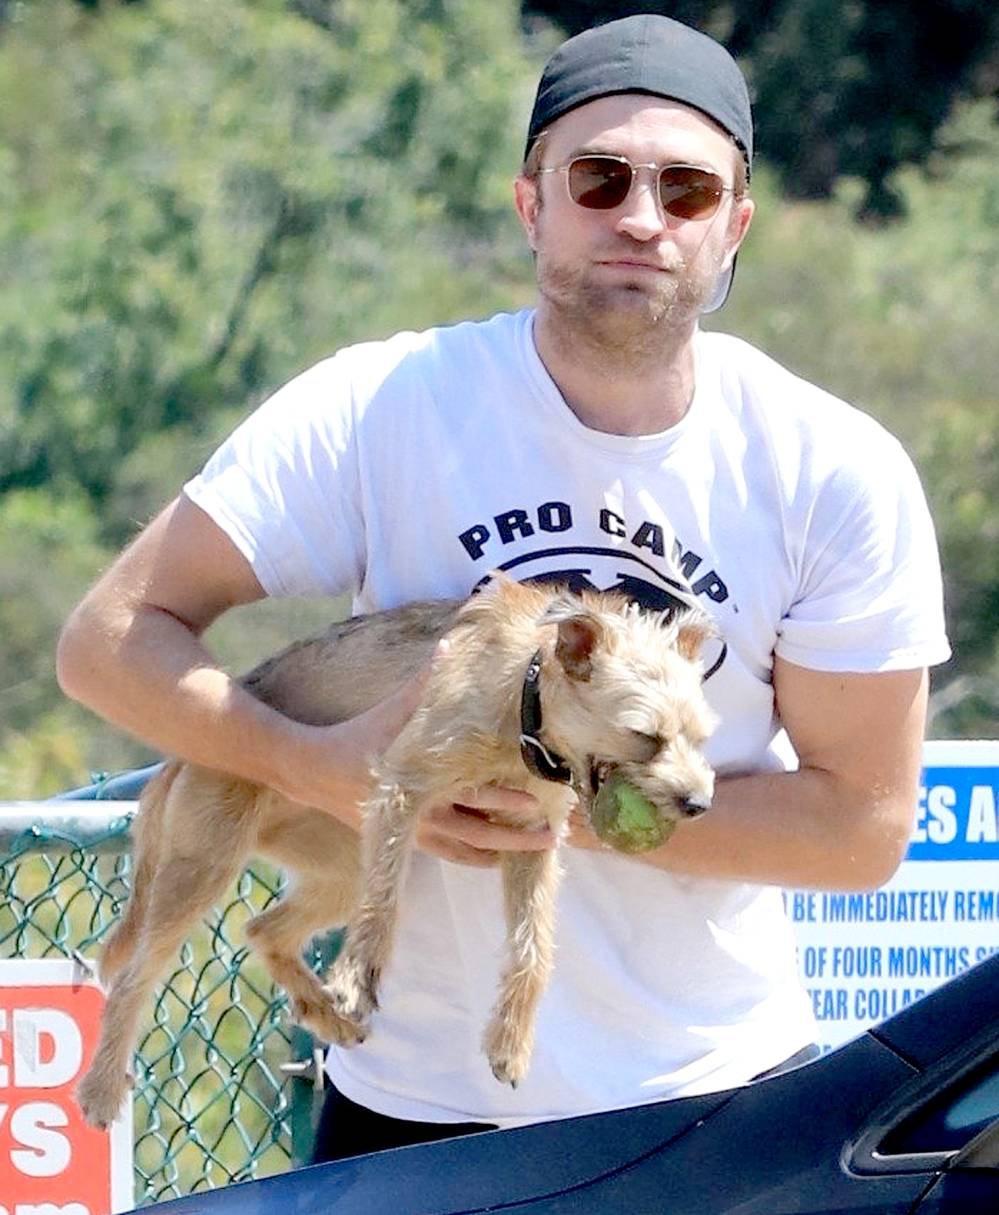 Robert Pattinson enjoys a day at the dog park with his pooch on July 15, 2017.